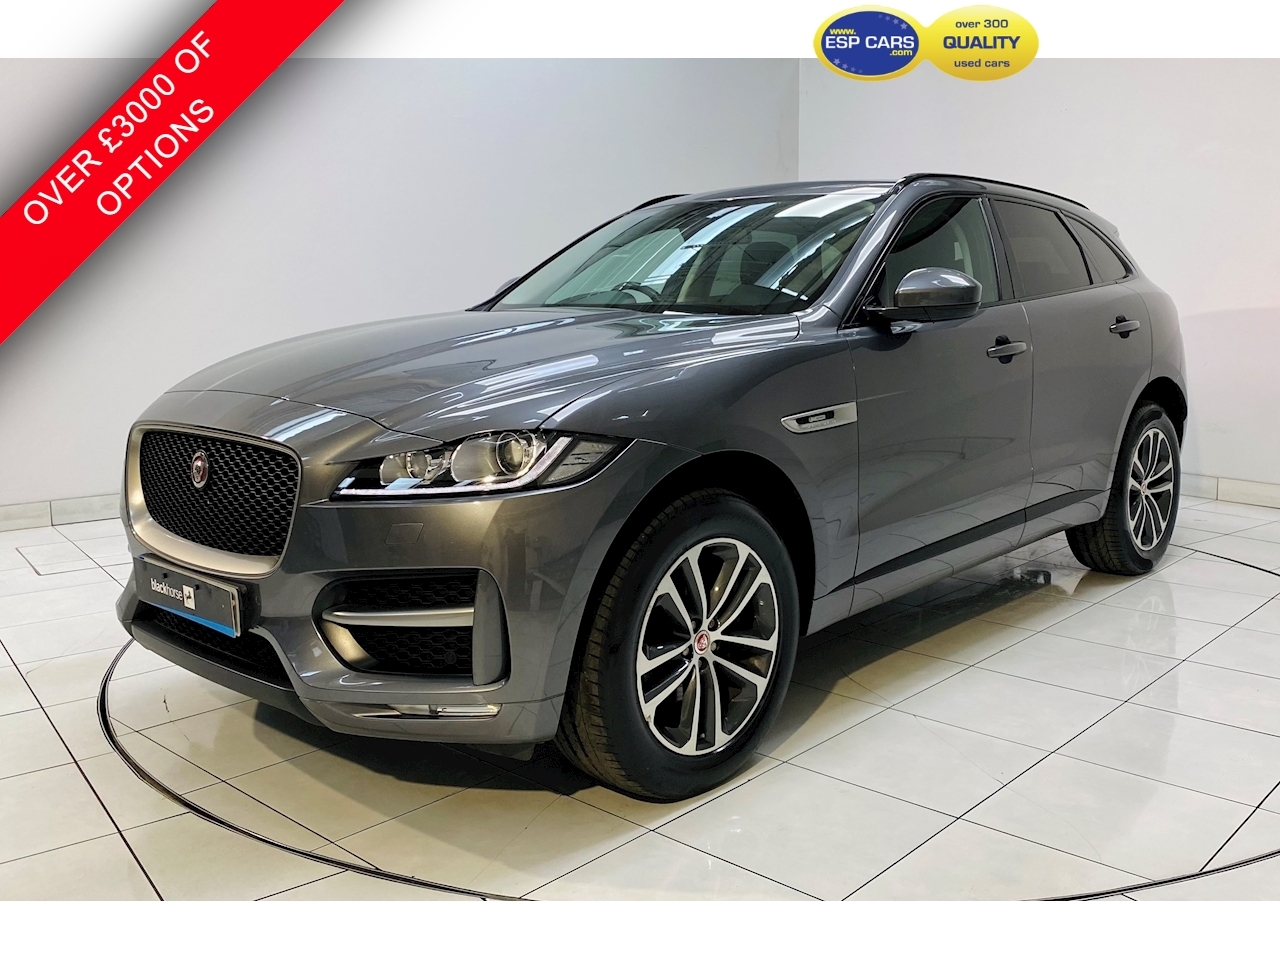 2.0d R-Sport SUV 5dr Diesel Auto AWD (s/s) (240 ps)